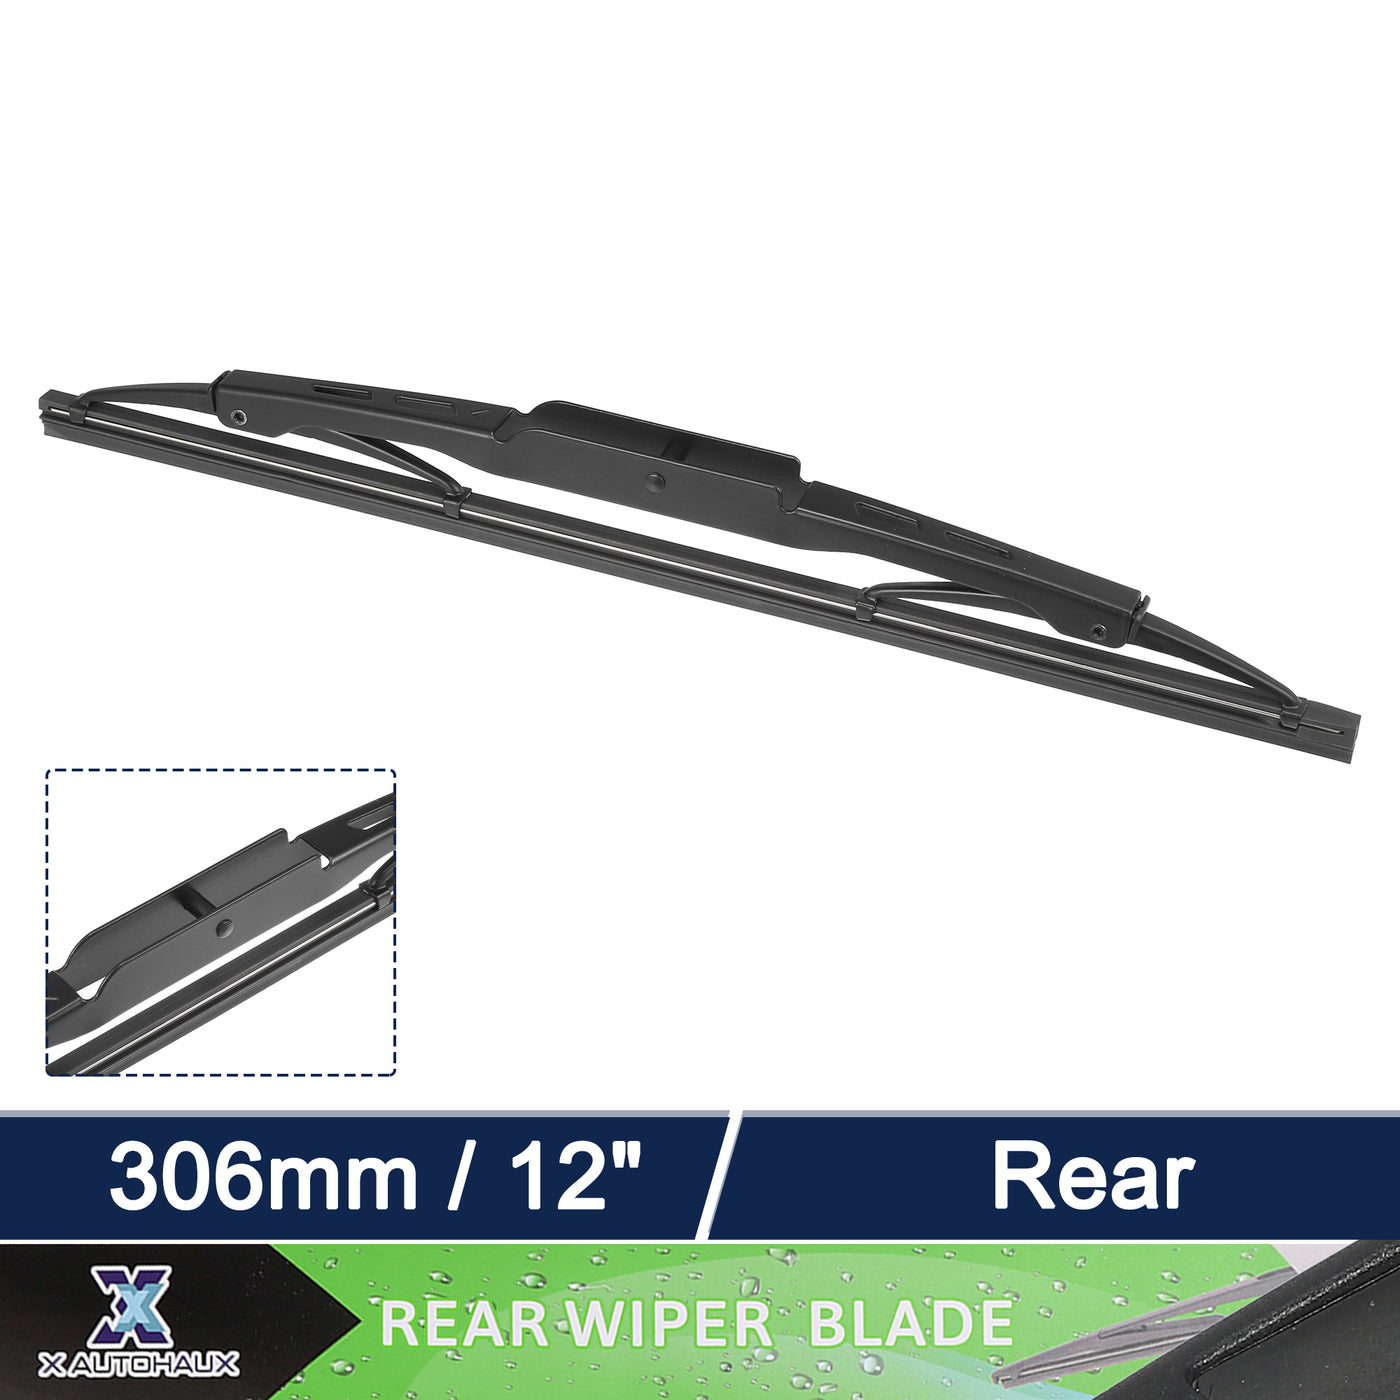 X AUTOHAUX Rear Windshield Wiper Blade Replacement for Hyundai Tucson 2004-2010 for Kia Sportage 2004-2010 for Chevrolet Captiva 2006-2020